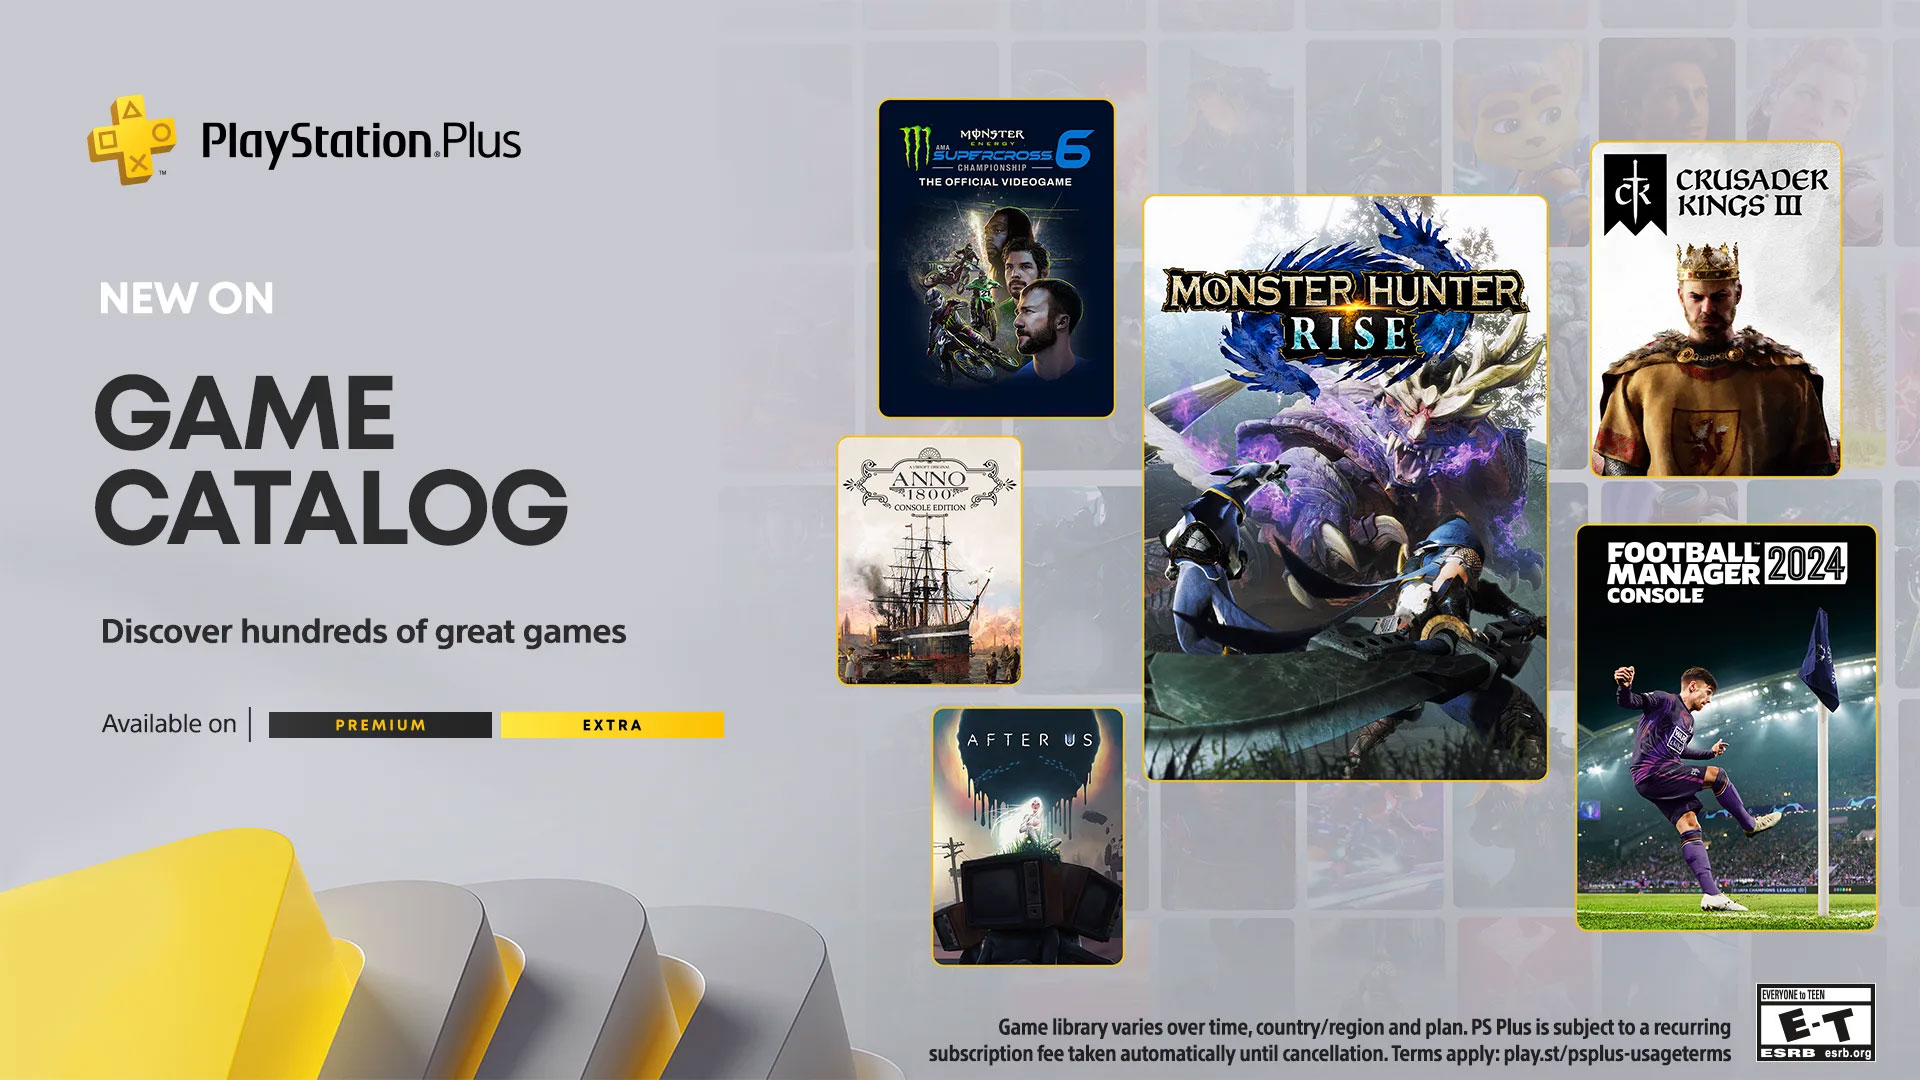 The new additions to PlayStation Plus Game Catalog will all be playable on June 18